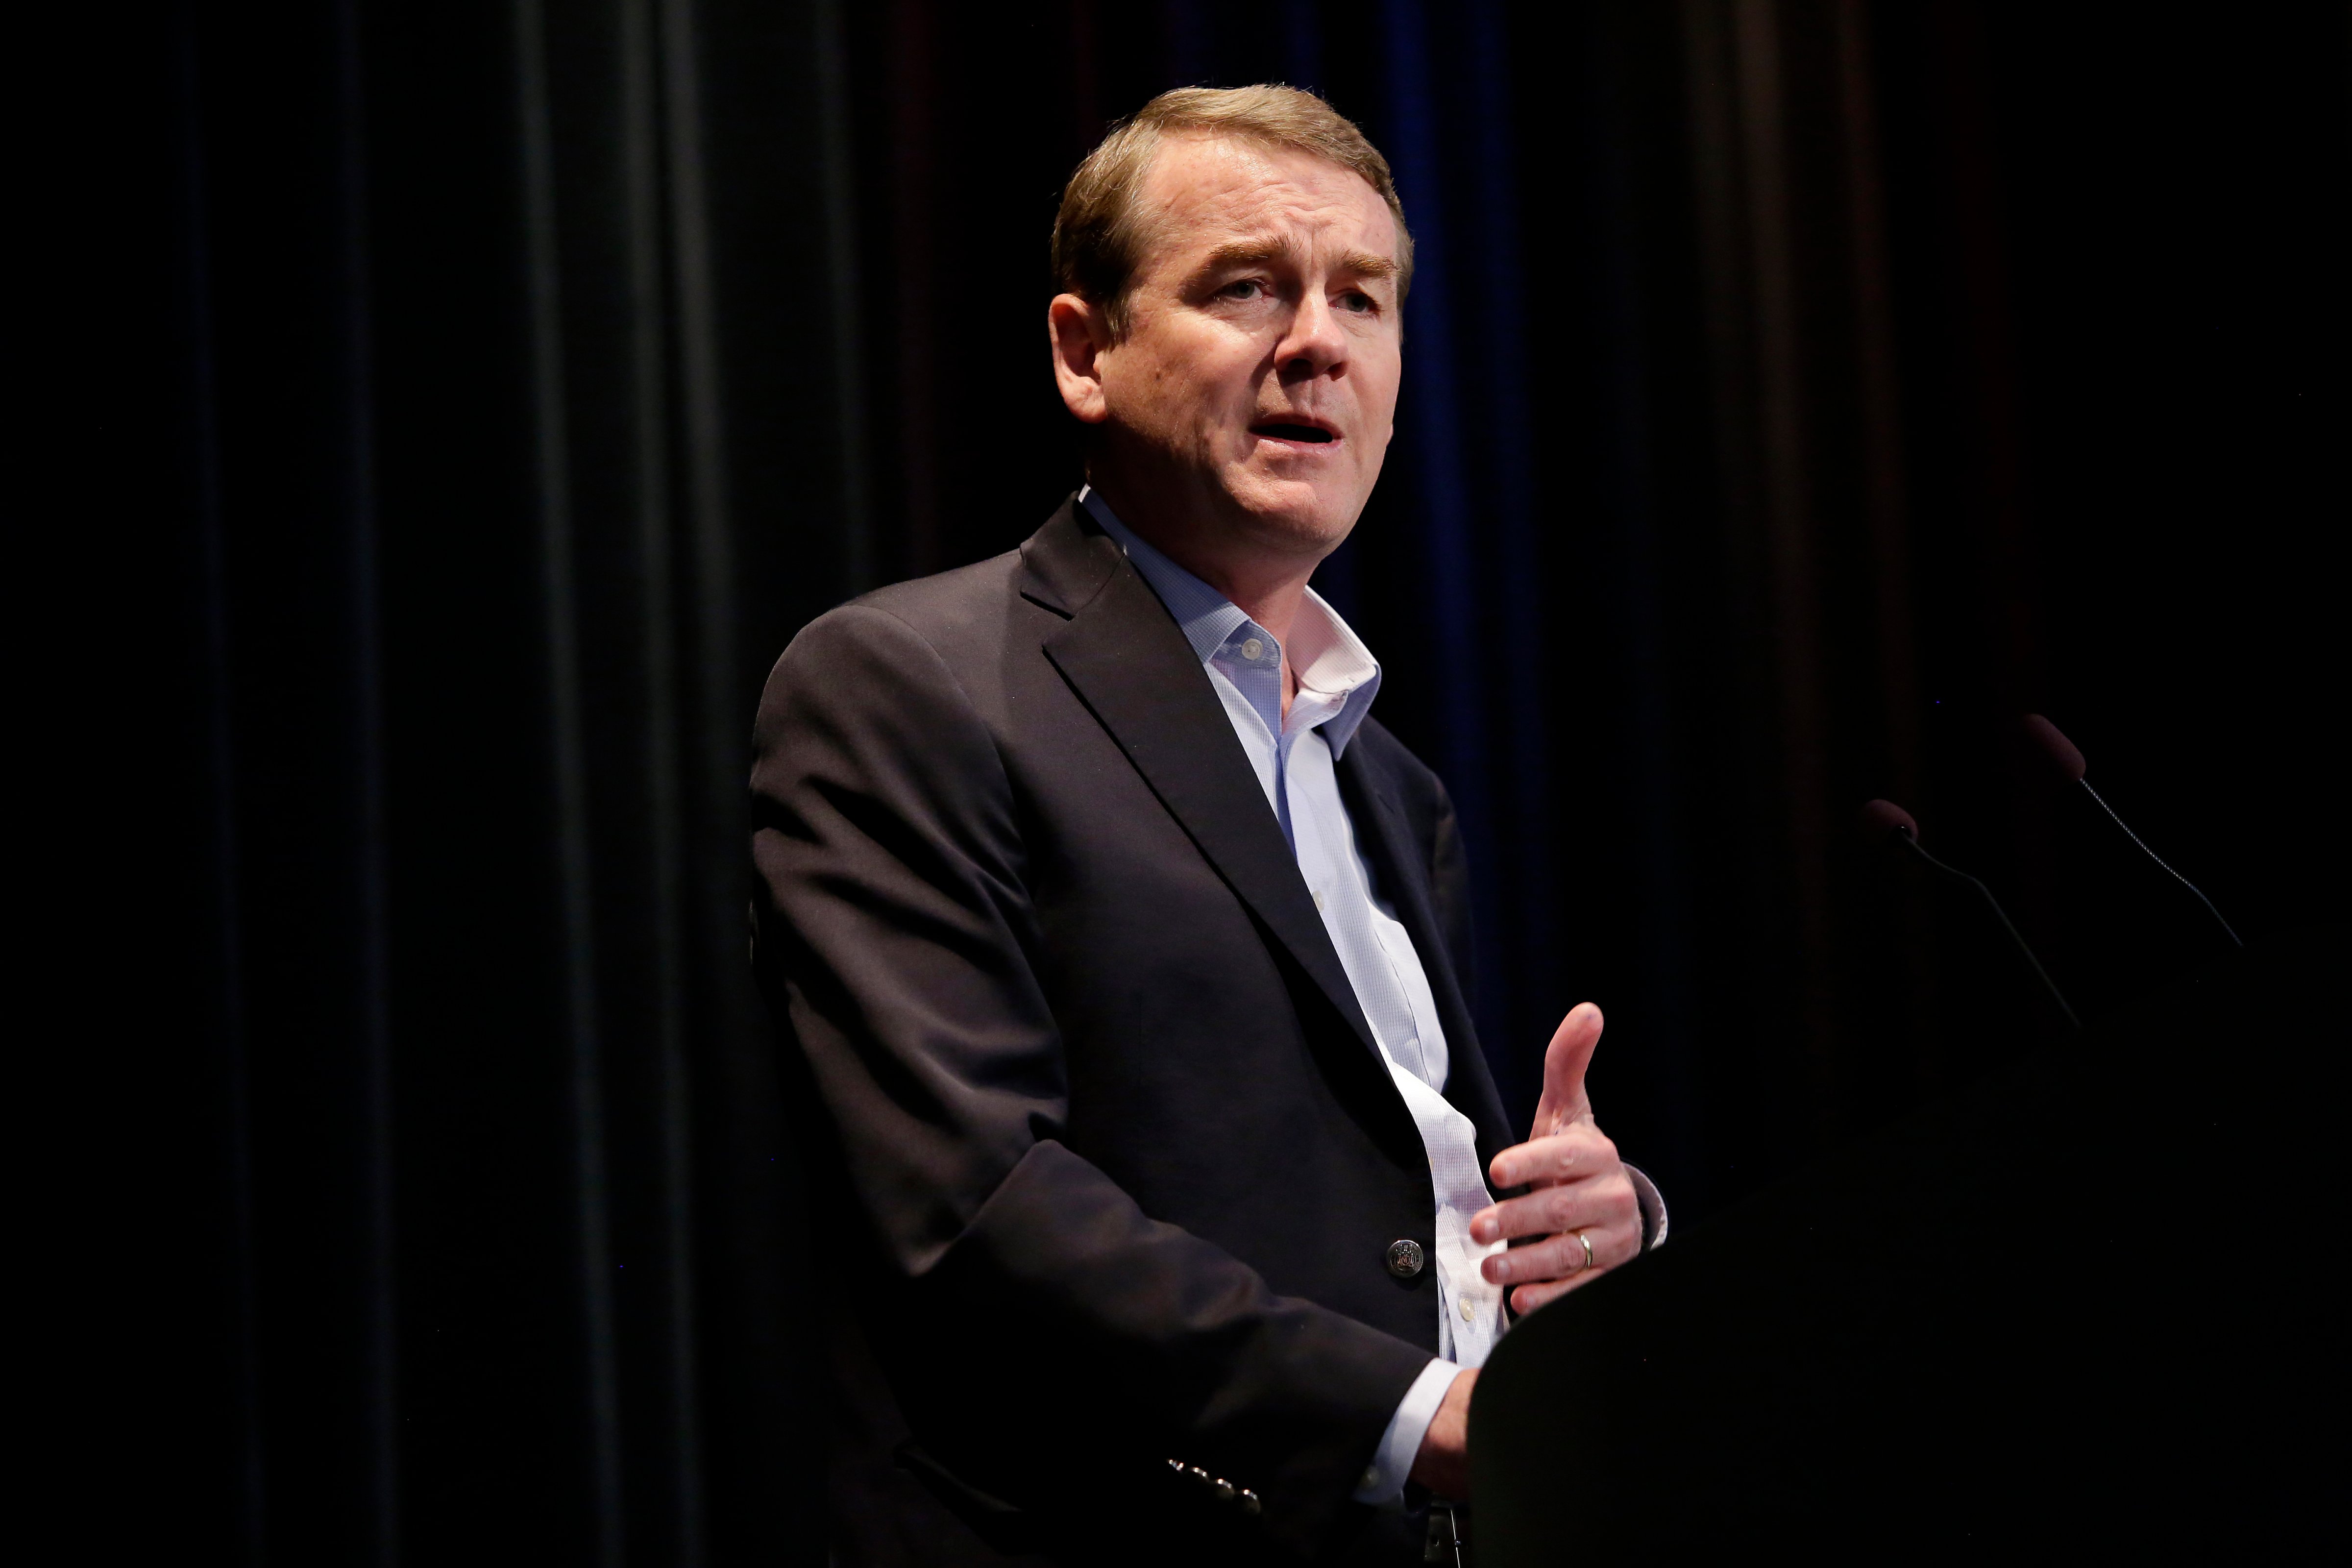 Democratic presidential candidate, U.S. Sen. for Colorado Michael Bennet speaks at the Iowa Federation Labor Convention in Altoona, Iowa, on August 21, 2019. (Joshua Lott&mdash;Getty Images)